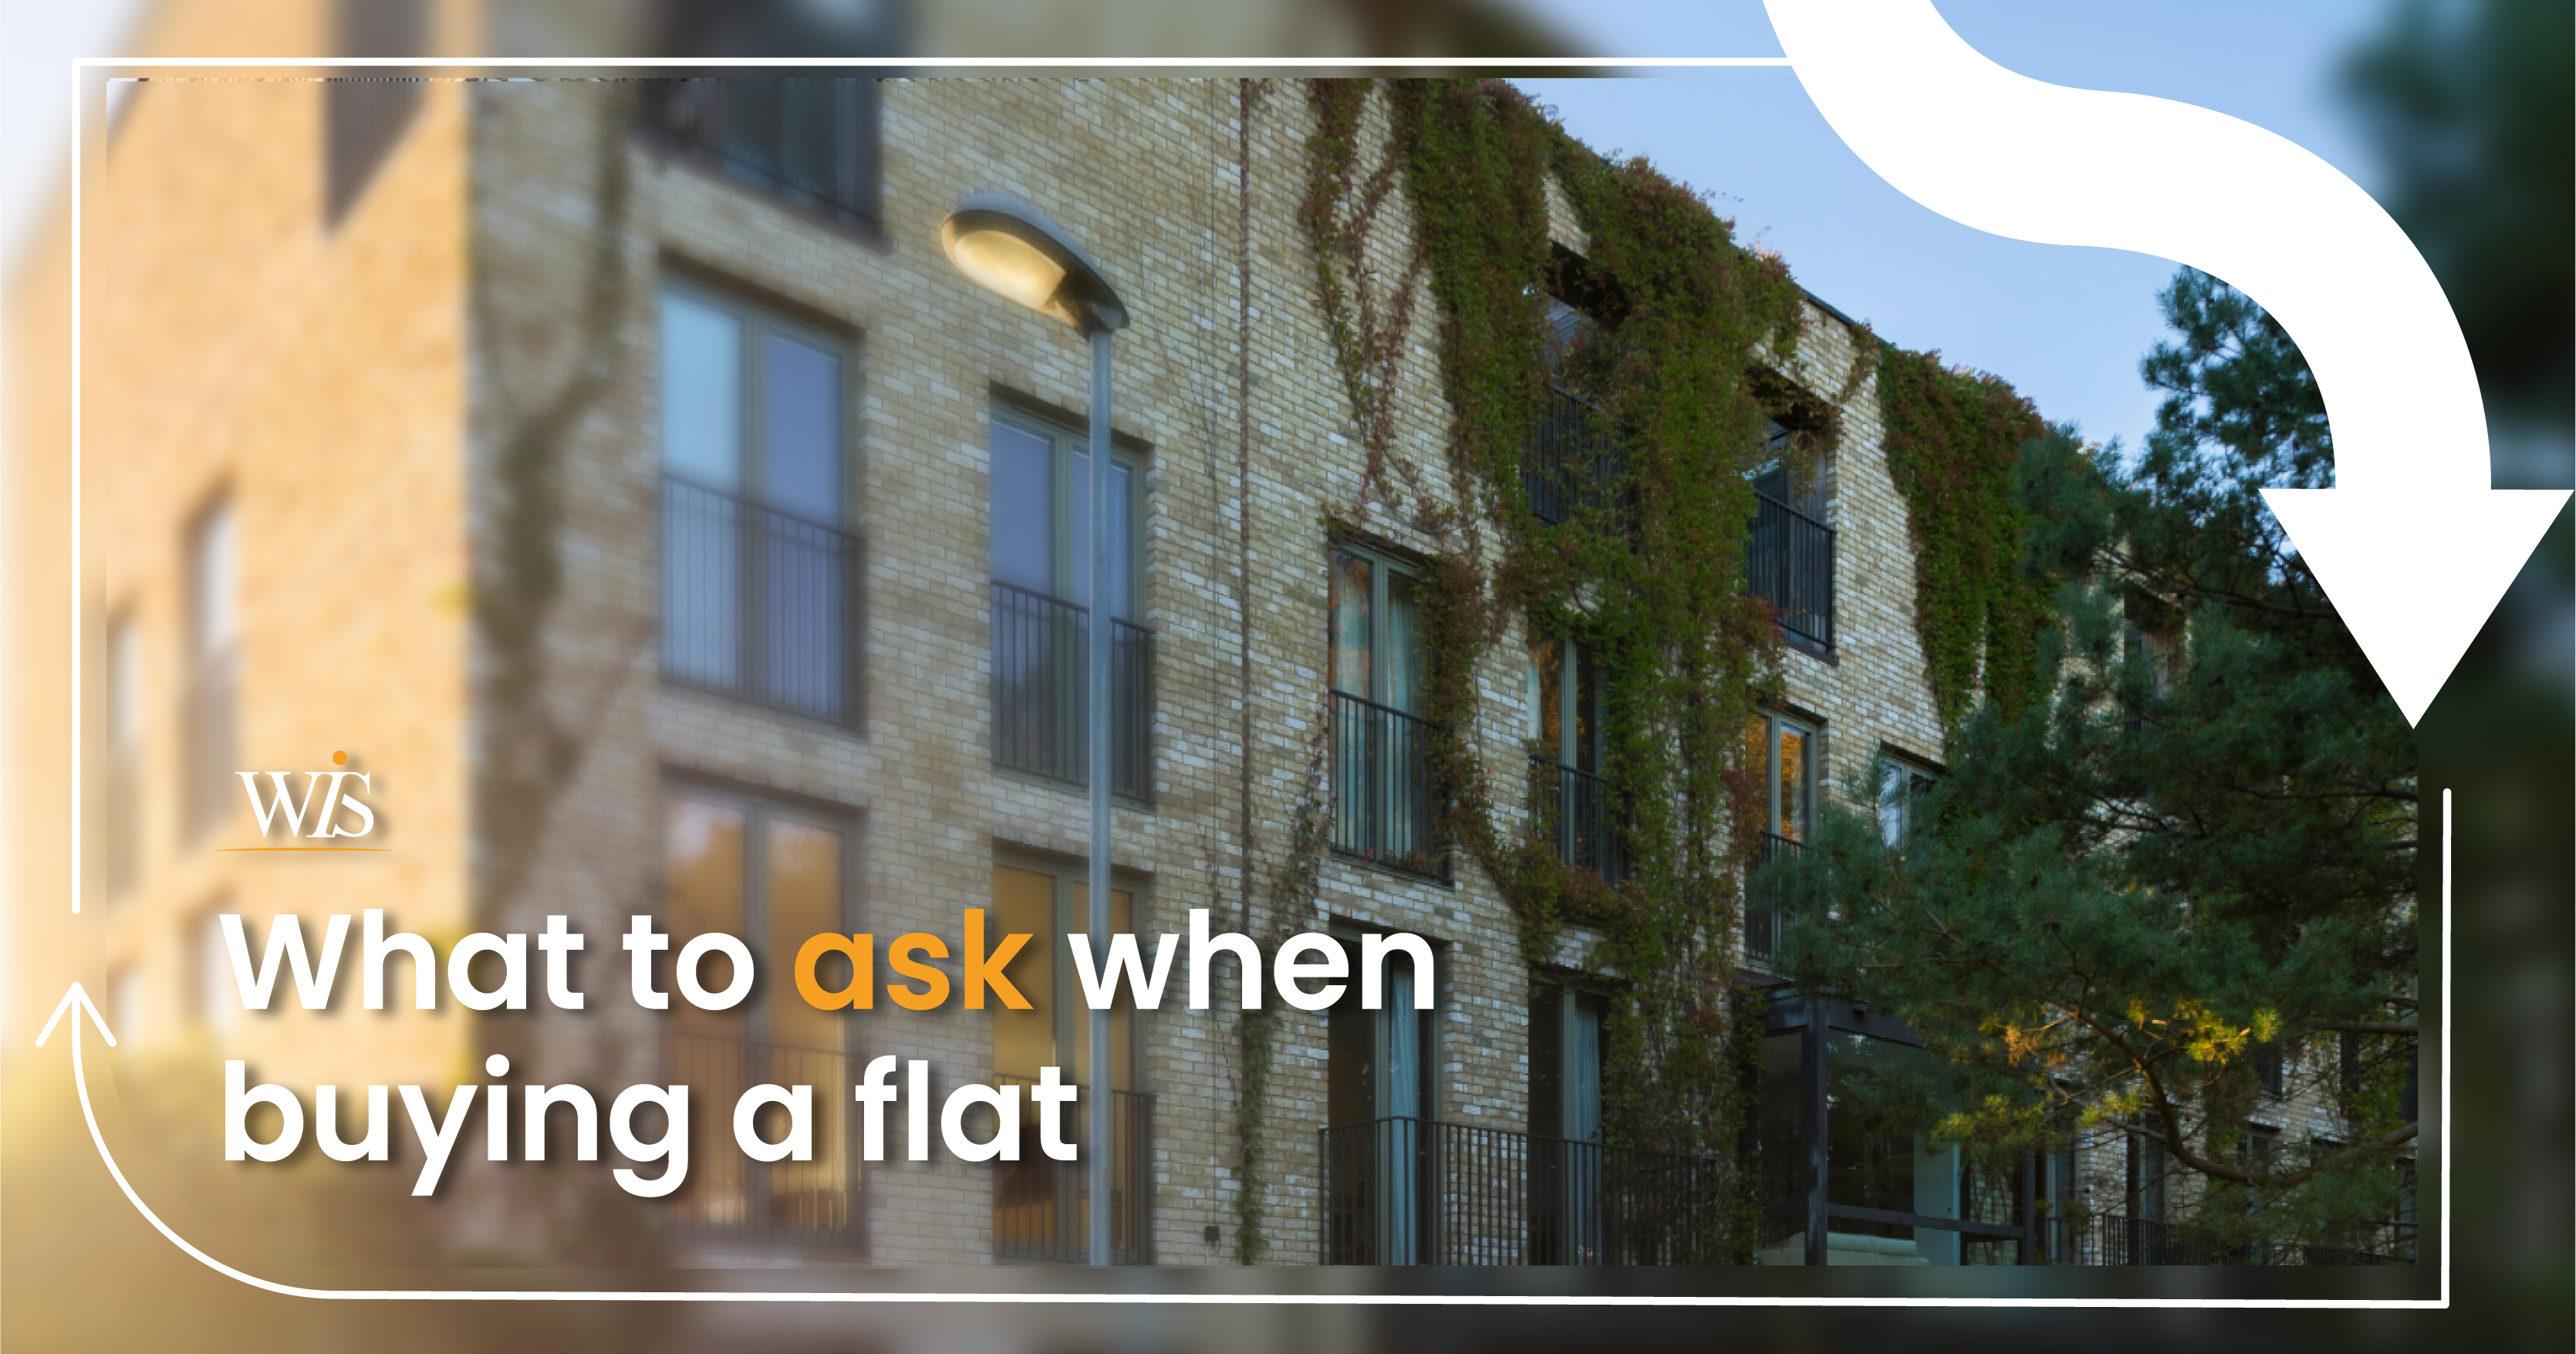 What to ask when buying a flat image